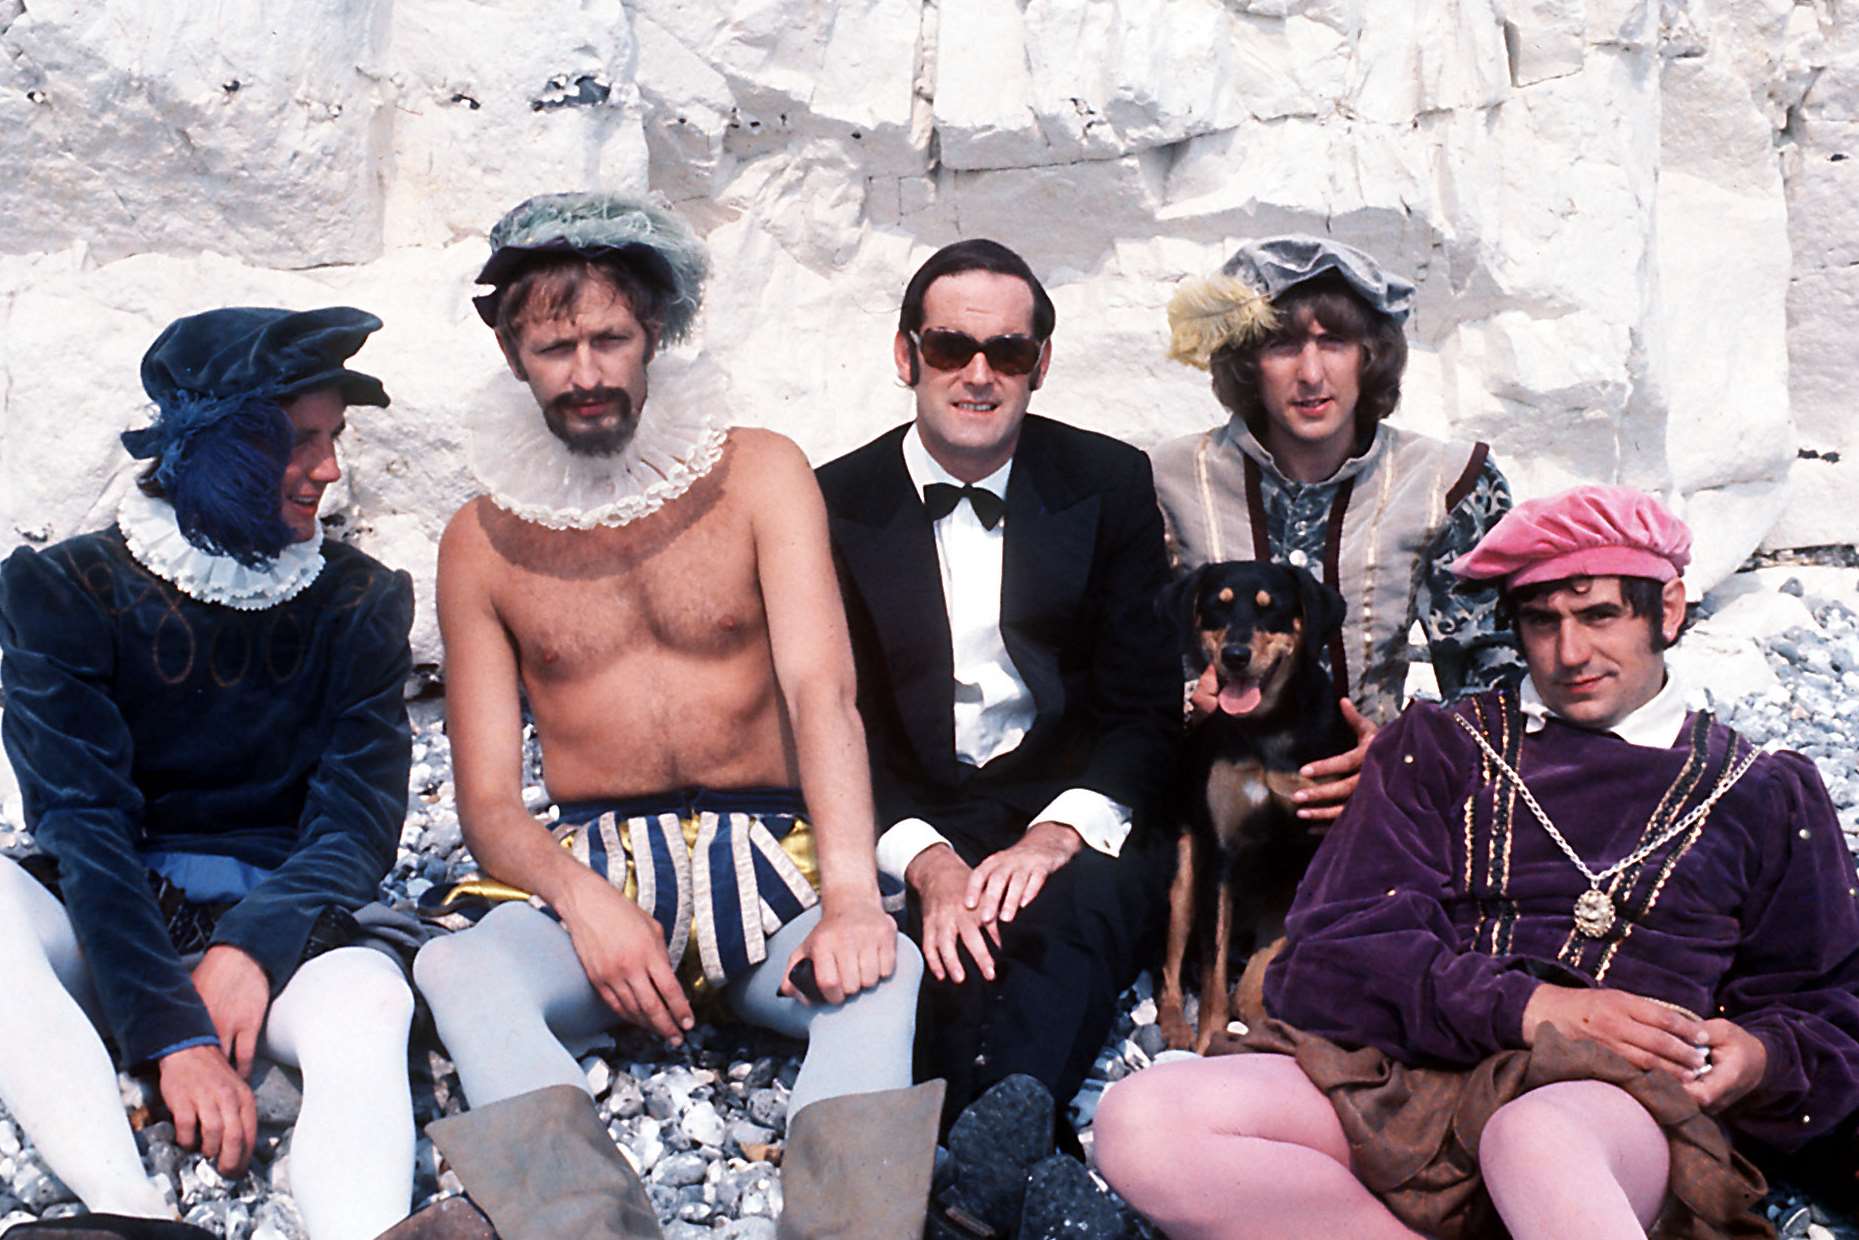 From left: Michael Palin, Graham Chapman, John Cleese, Eric Idle and Terry Jones from Monty Python